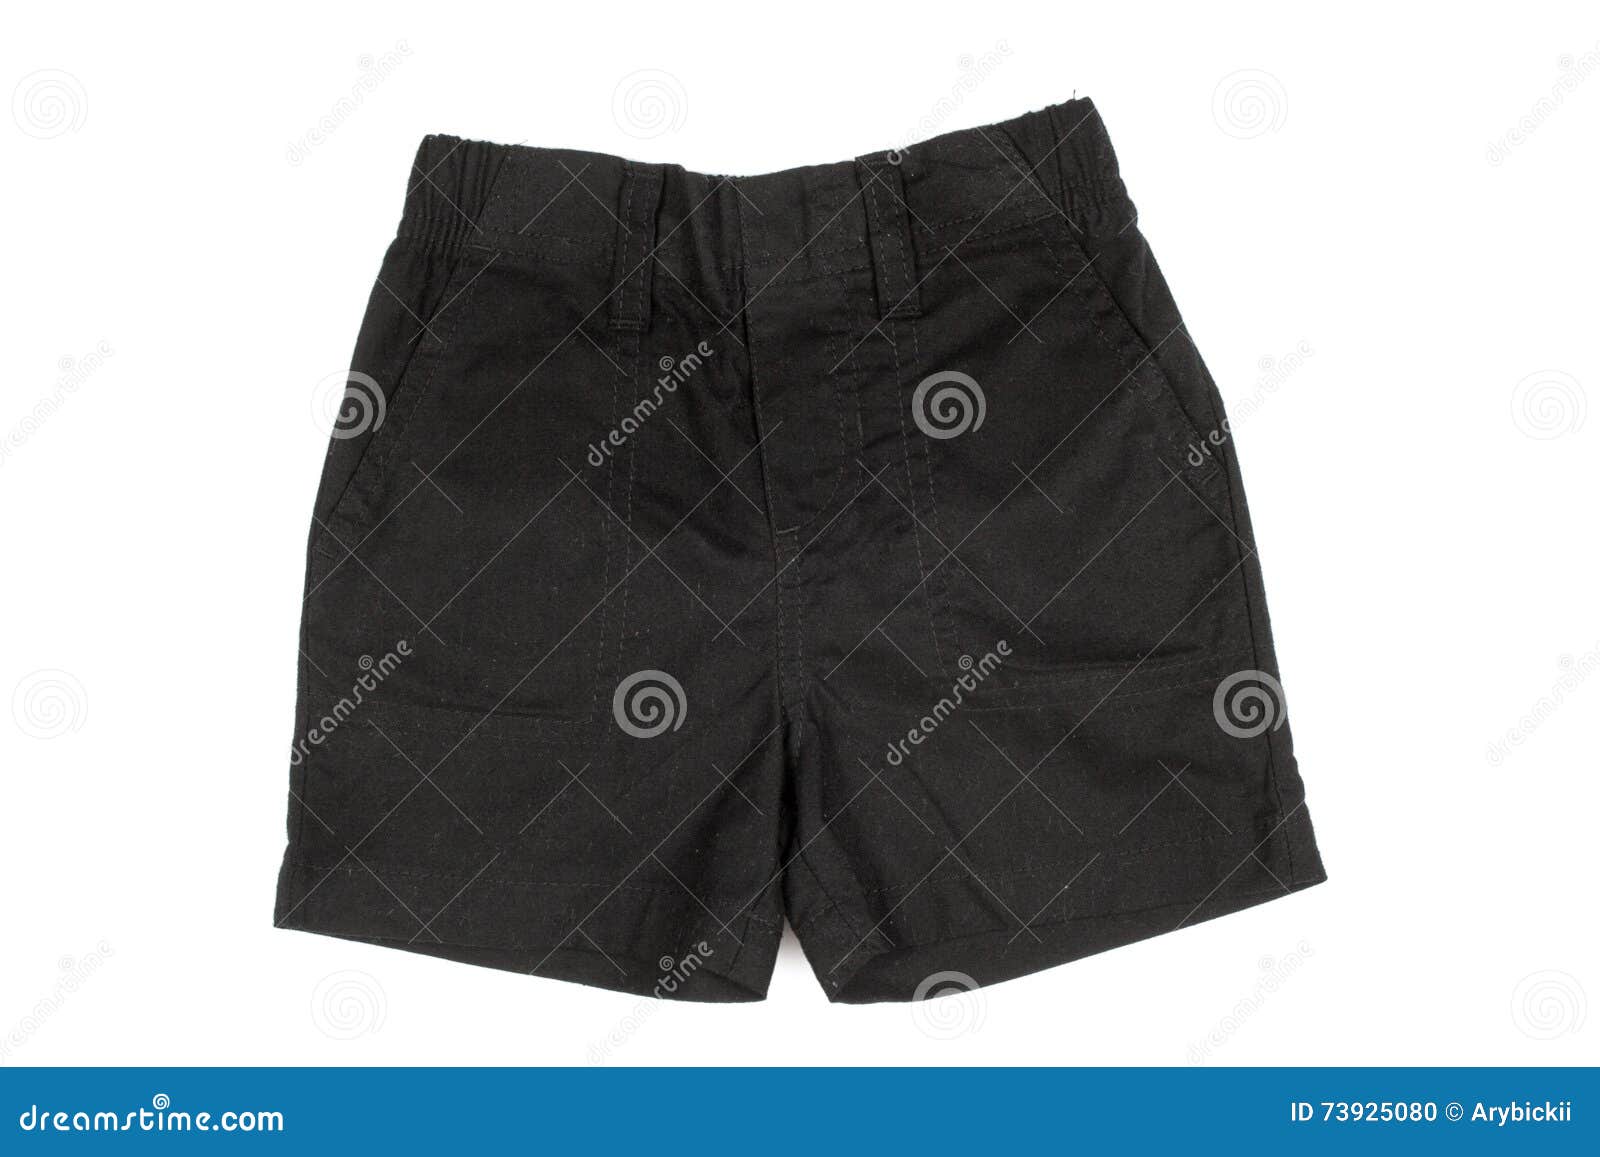 Children shorts on a white stock photo. Image of apparel - 73925080